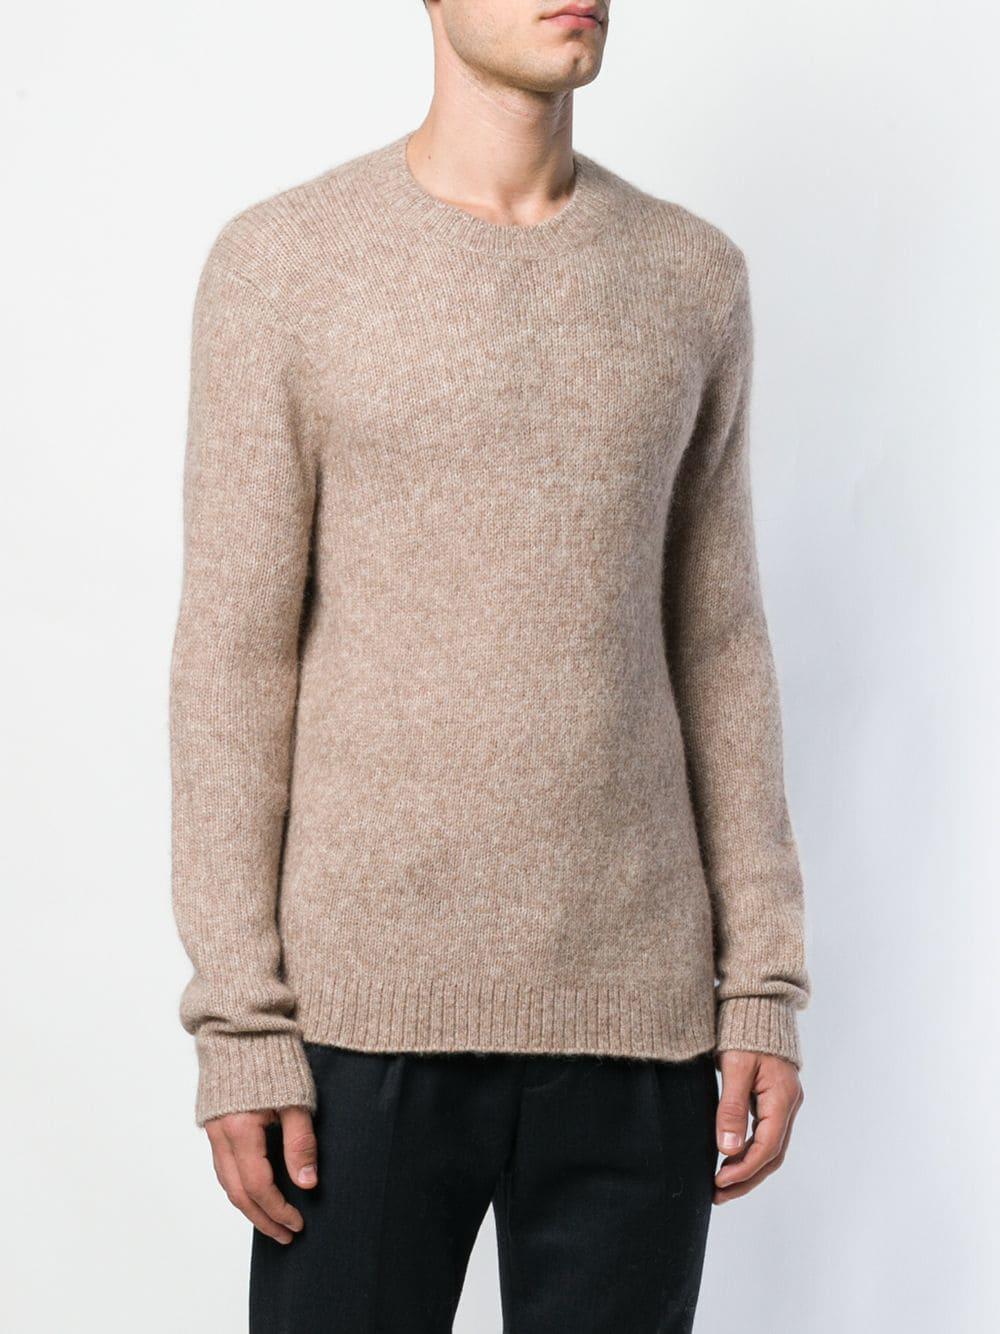 Theory Wool Crew Neck Sweater in Brown for Men - Lyst